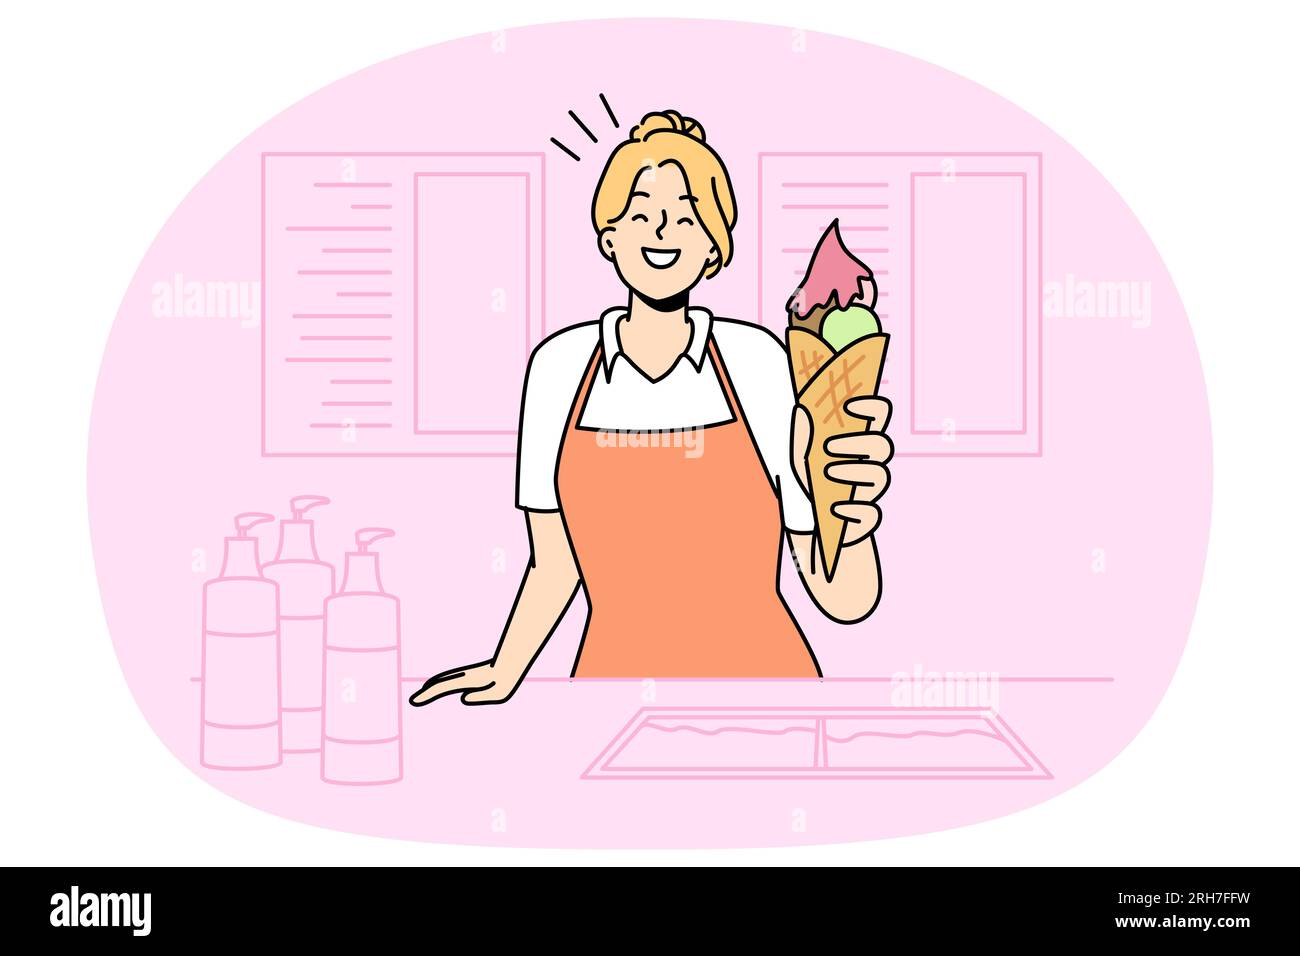 Smiling girl seller stretch hand with ice-cream from street vendor. Happy woman give frozen dessert. Commerce and small business. Vector illustration. Stock Vector